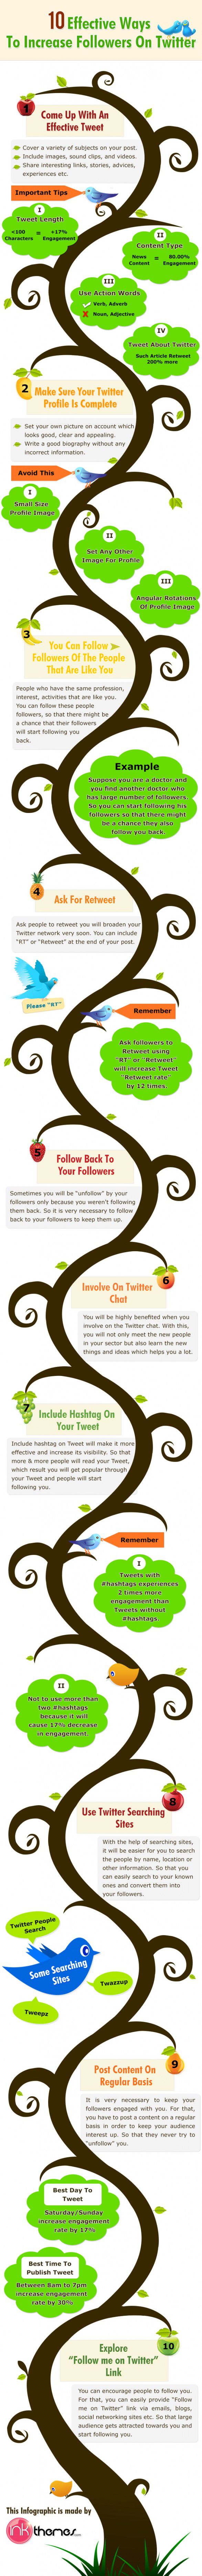 Infographie 85 - 10-effective-ways-to-increase-followers-on-Twitter